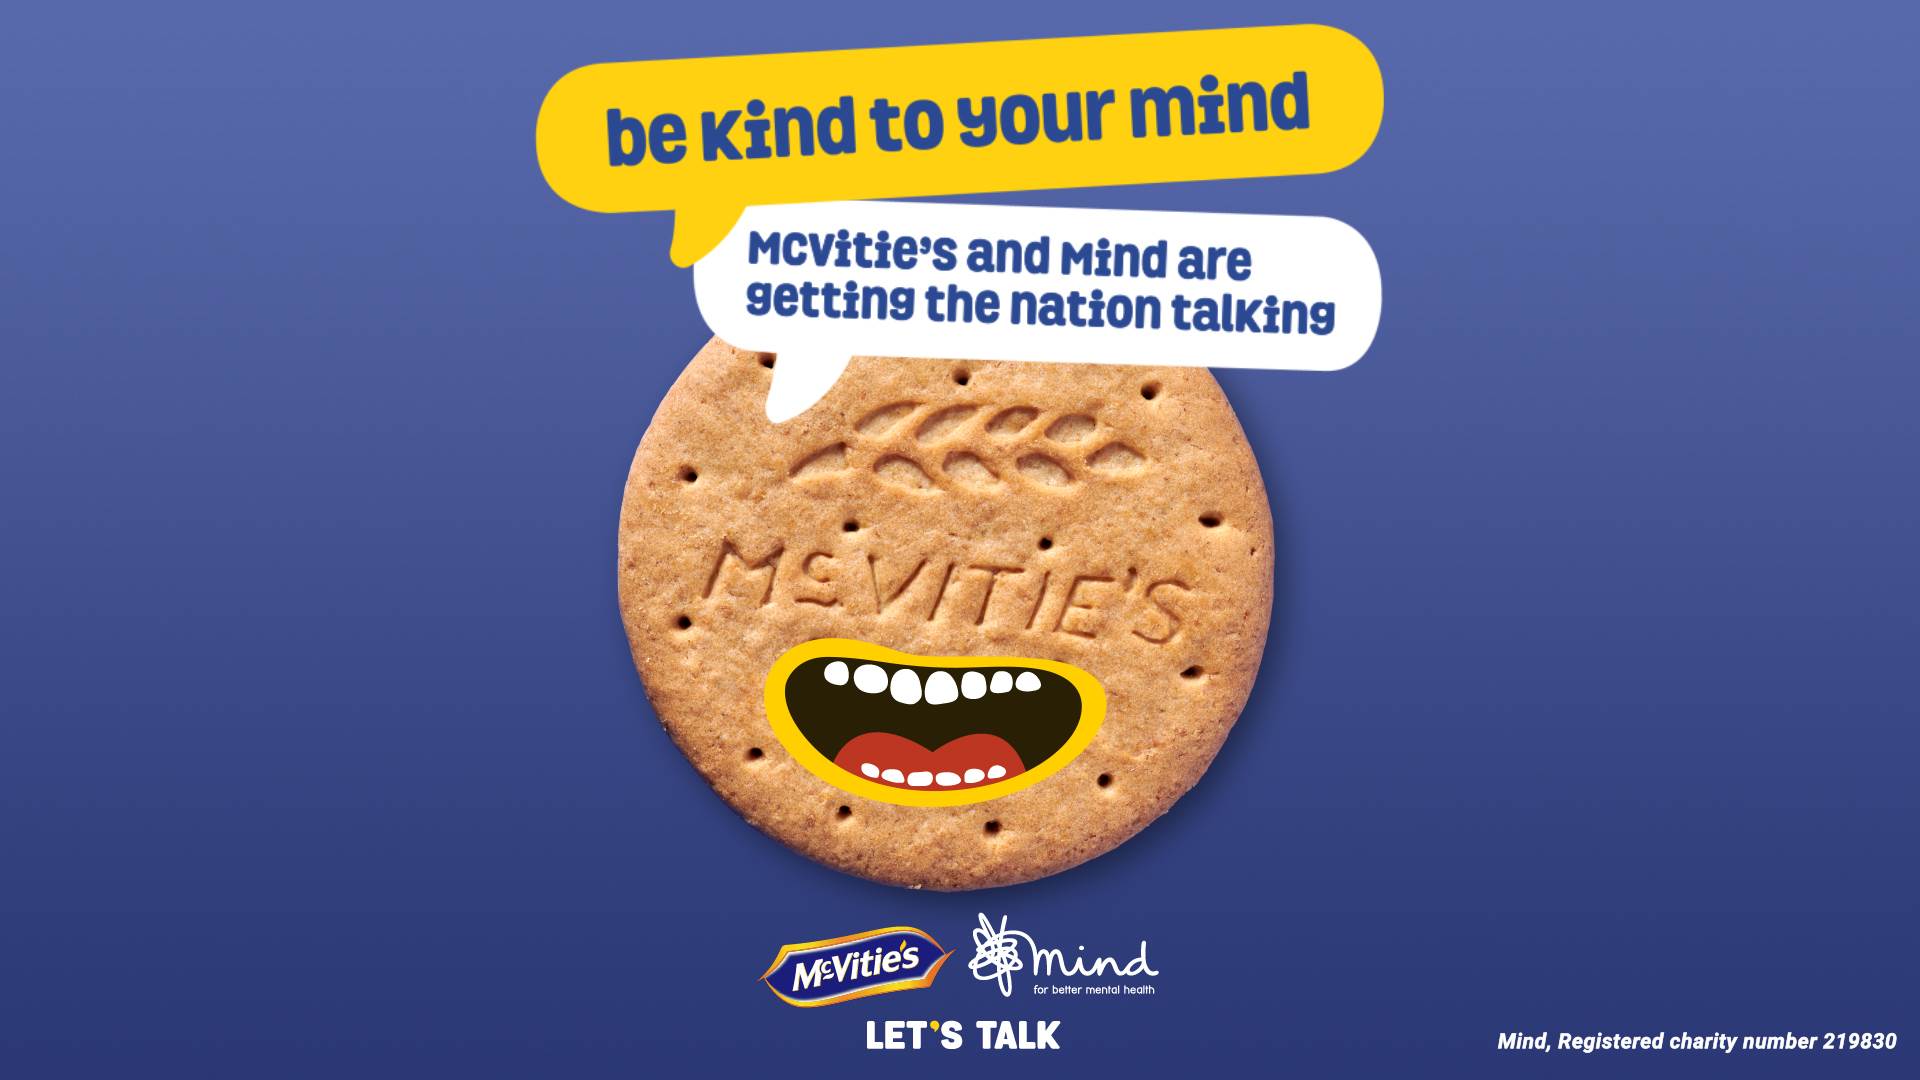 Mcvities biscuit with speech bubbles saying 'be kind to your mind' and 'Mcvitie's and Mind are getting the nation talking'